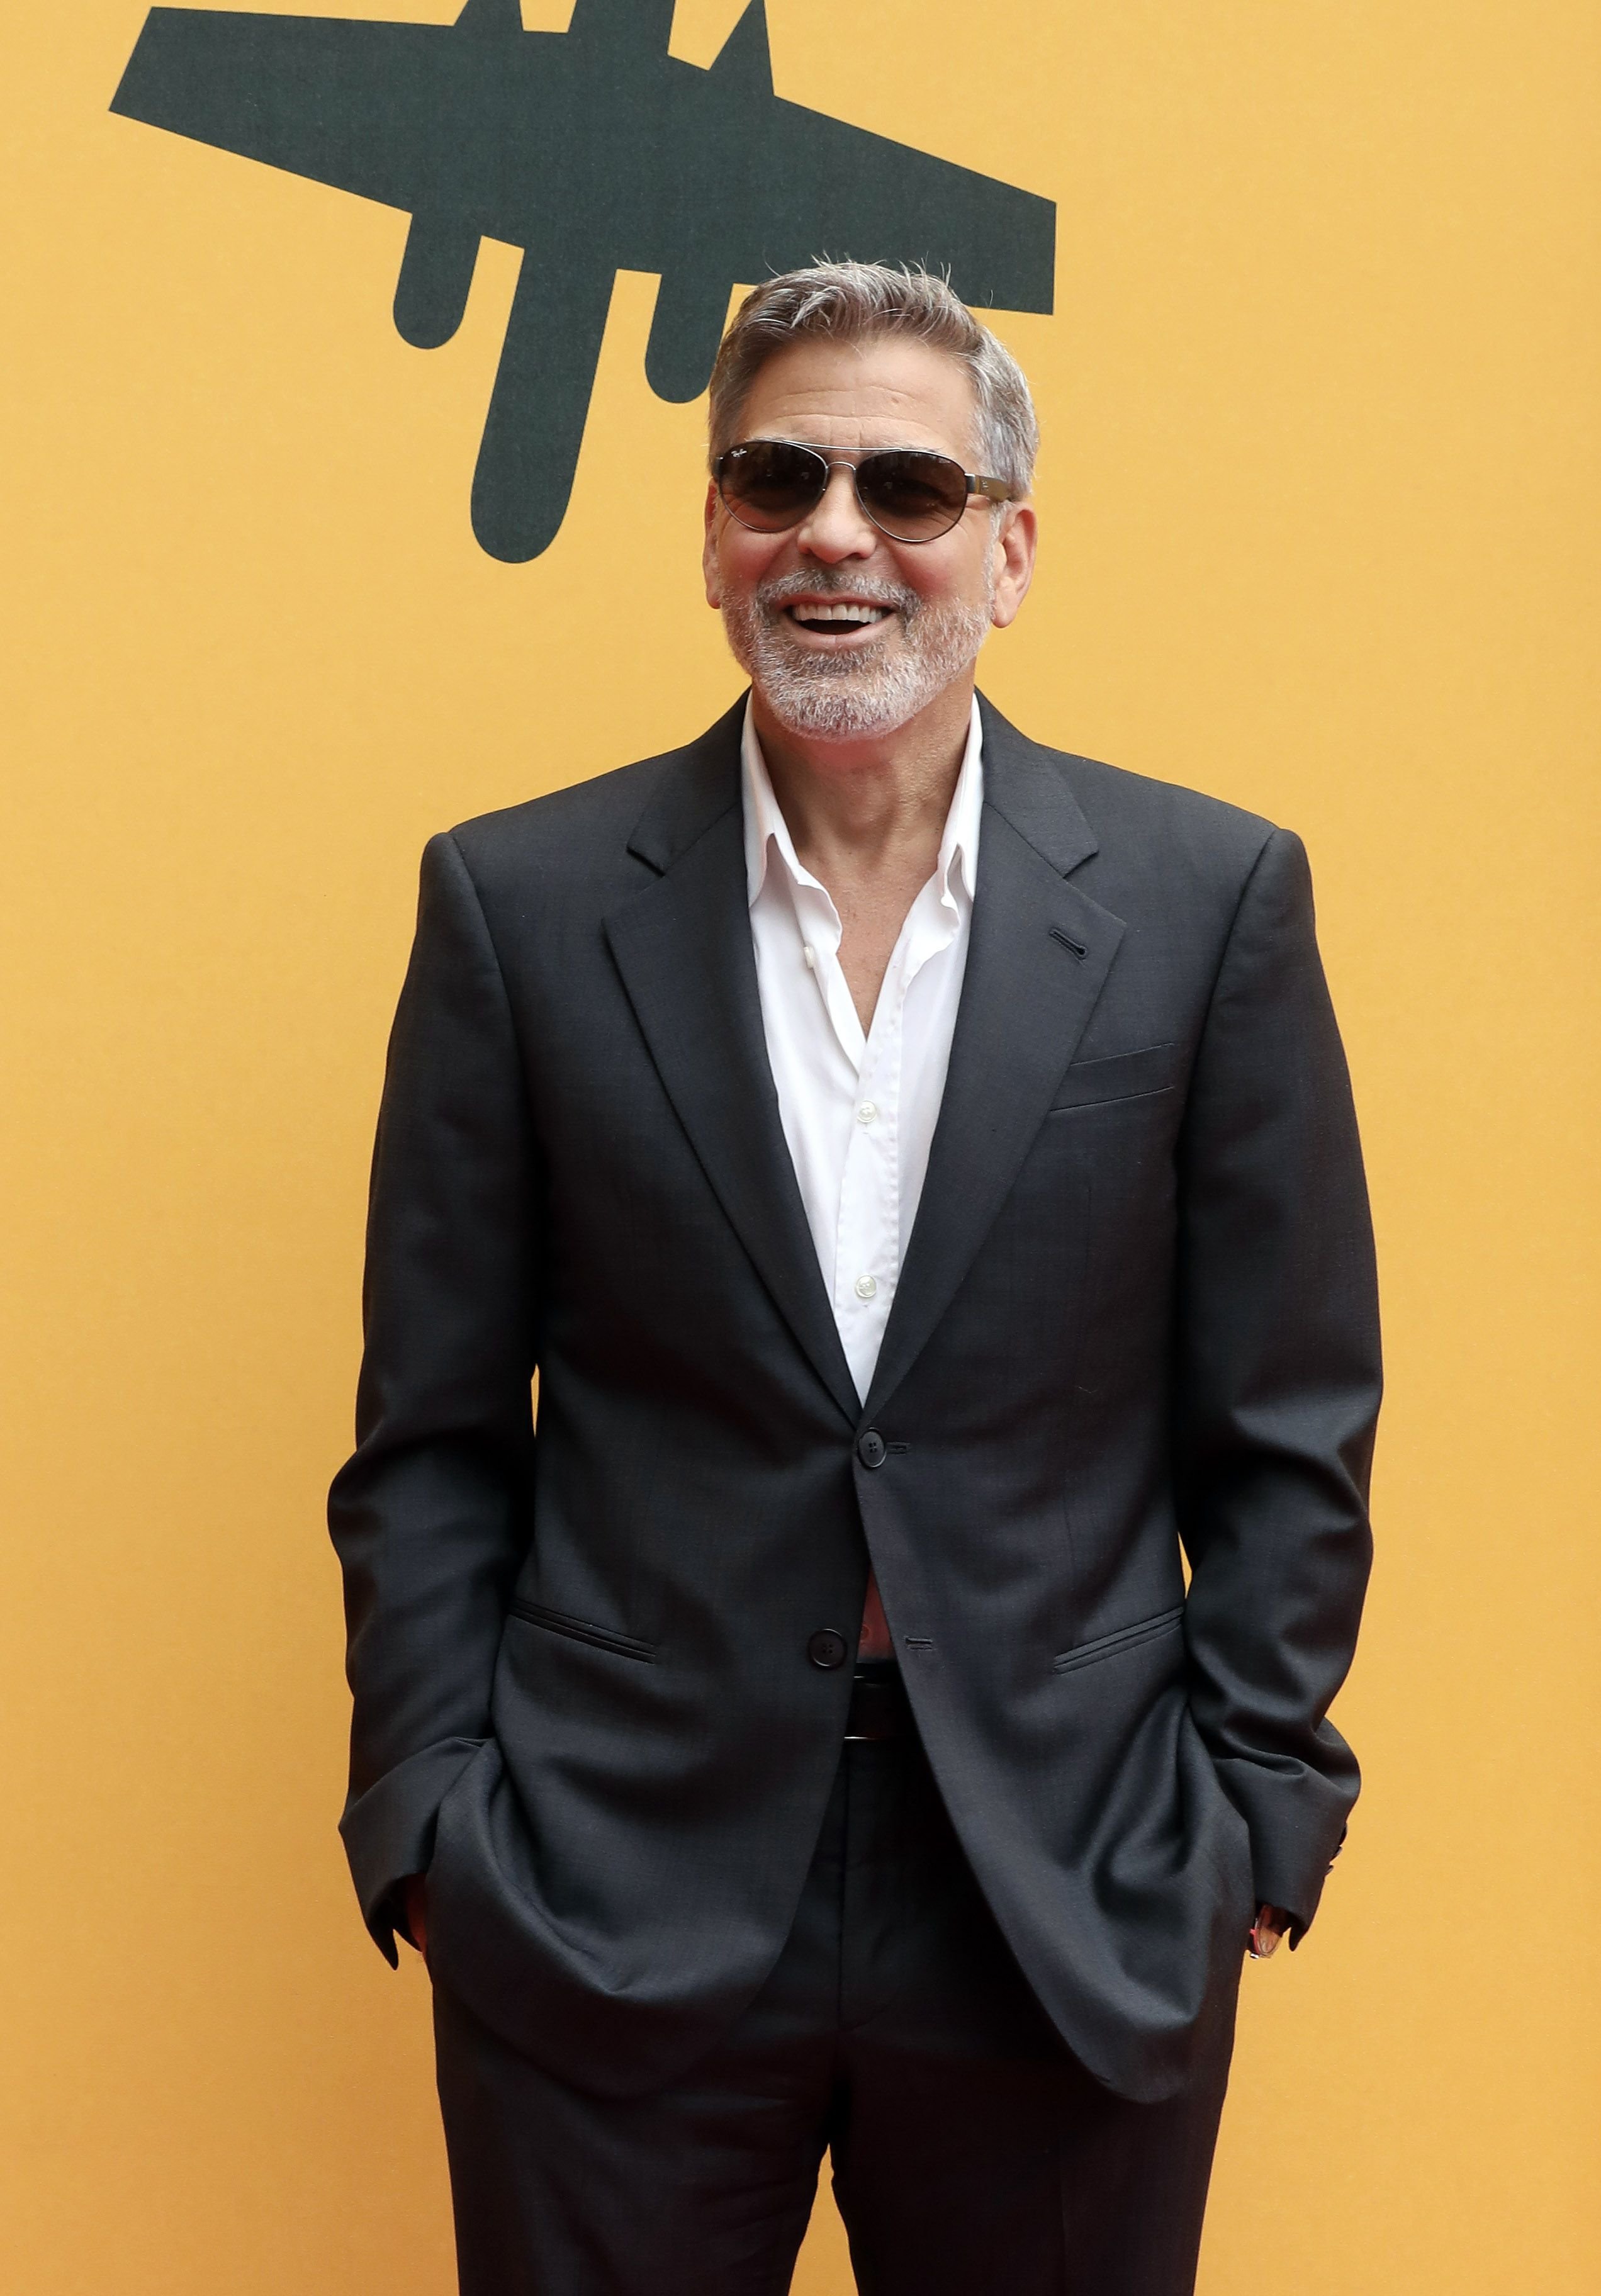 George Clooney at 'Catch-22' Photocall, a Sky production, at The Space Moderno Cinema on May 13, 2019 | Photo: Getty Images